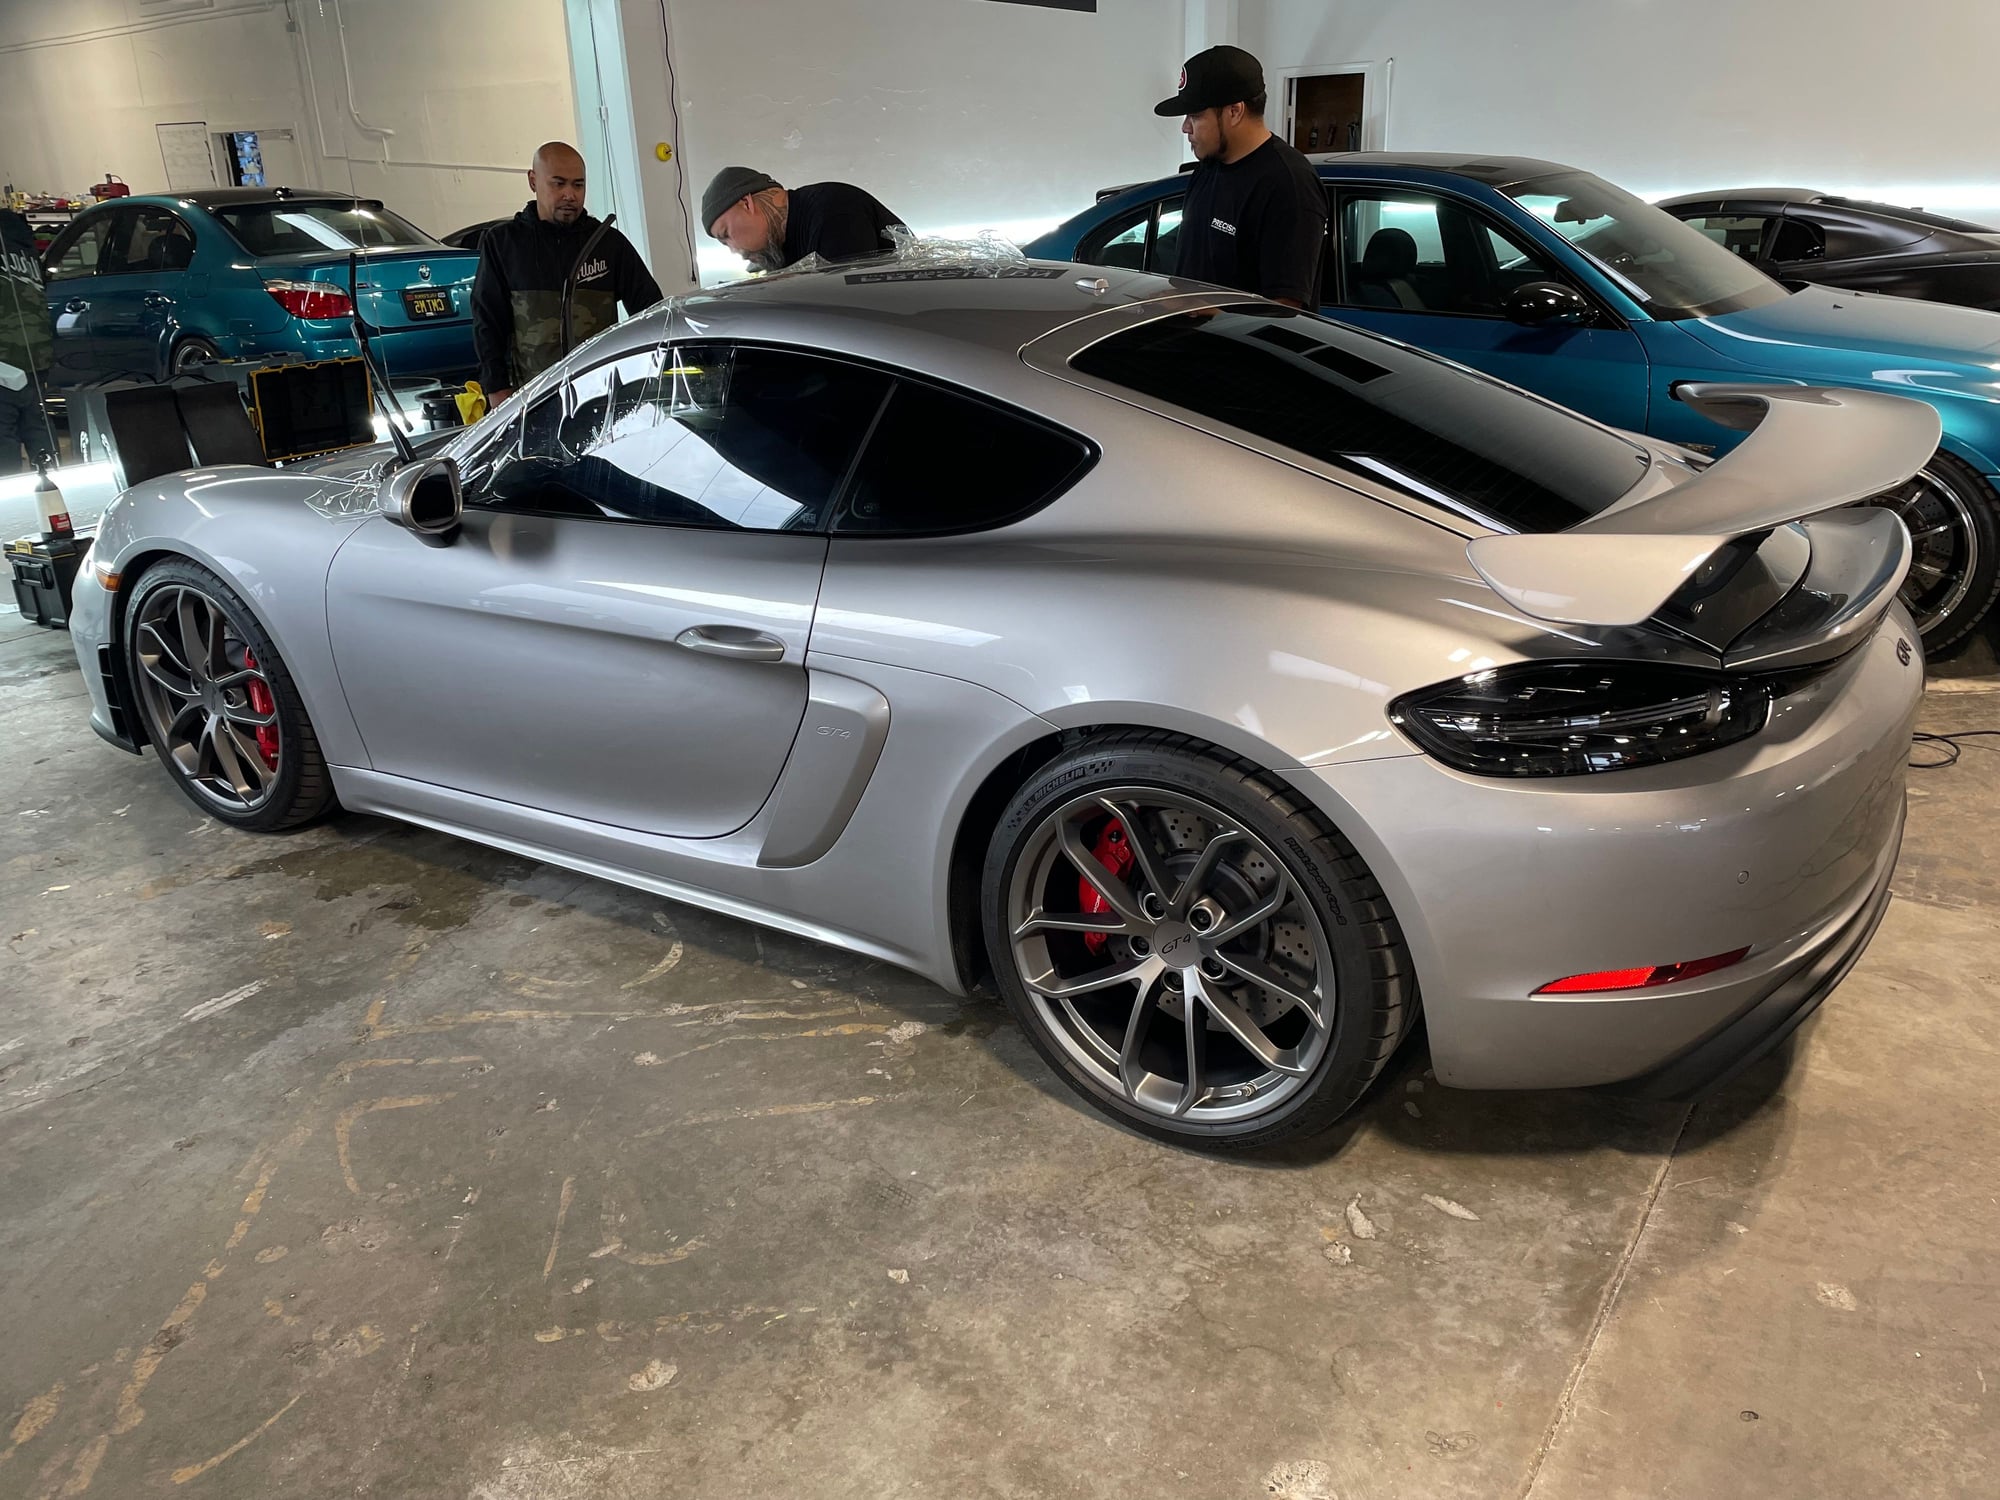 2020 Porsche 718 Cayman - 2020 718 GT4 CPO - Track Prepped - Used - VIN WP0AC2A87LS289267 - 20,200 Miles - 6 cyl - 2WD - Manual - Coupe - Silver - Pasadena, CA 91107, United States